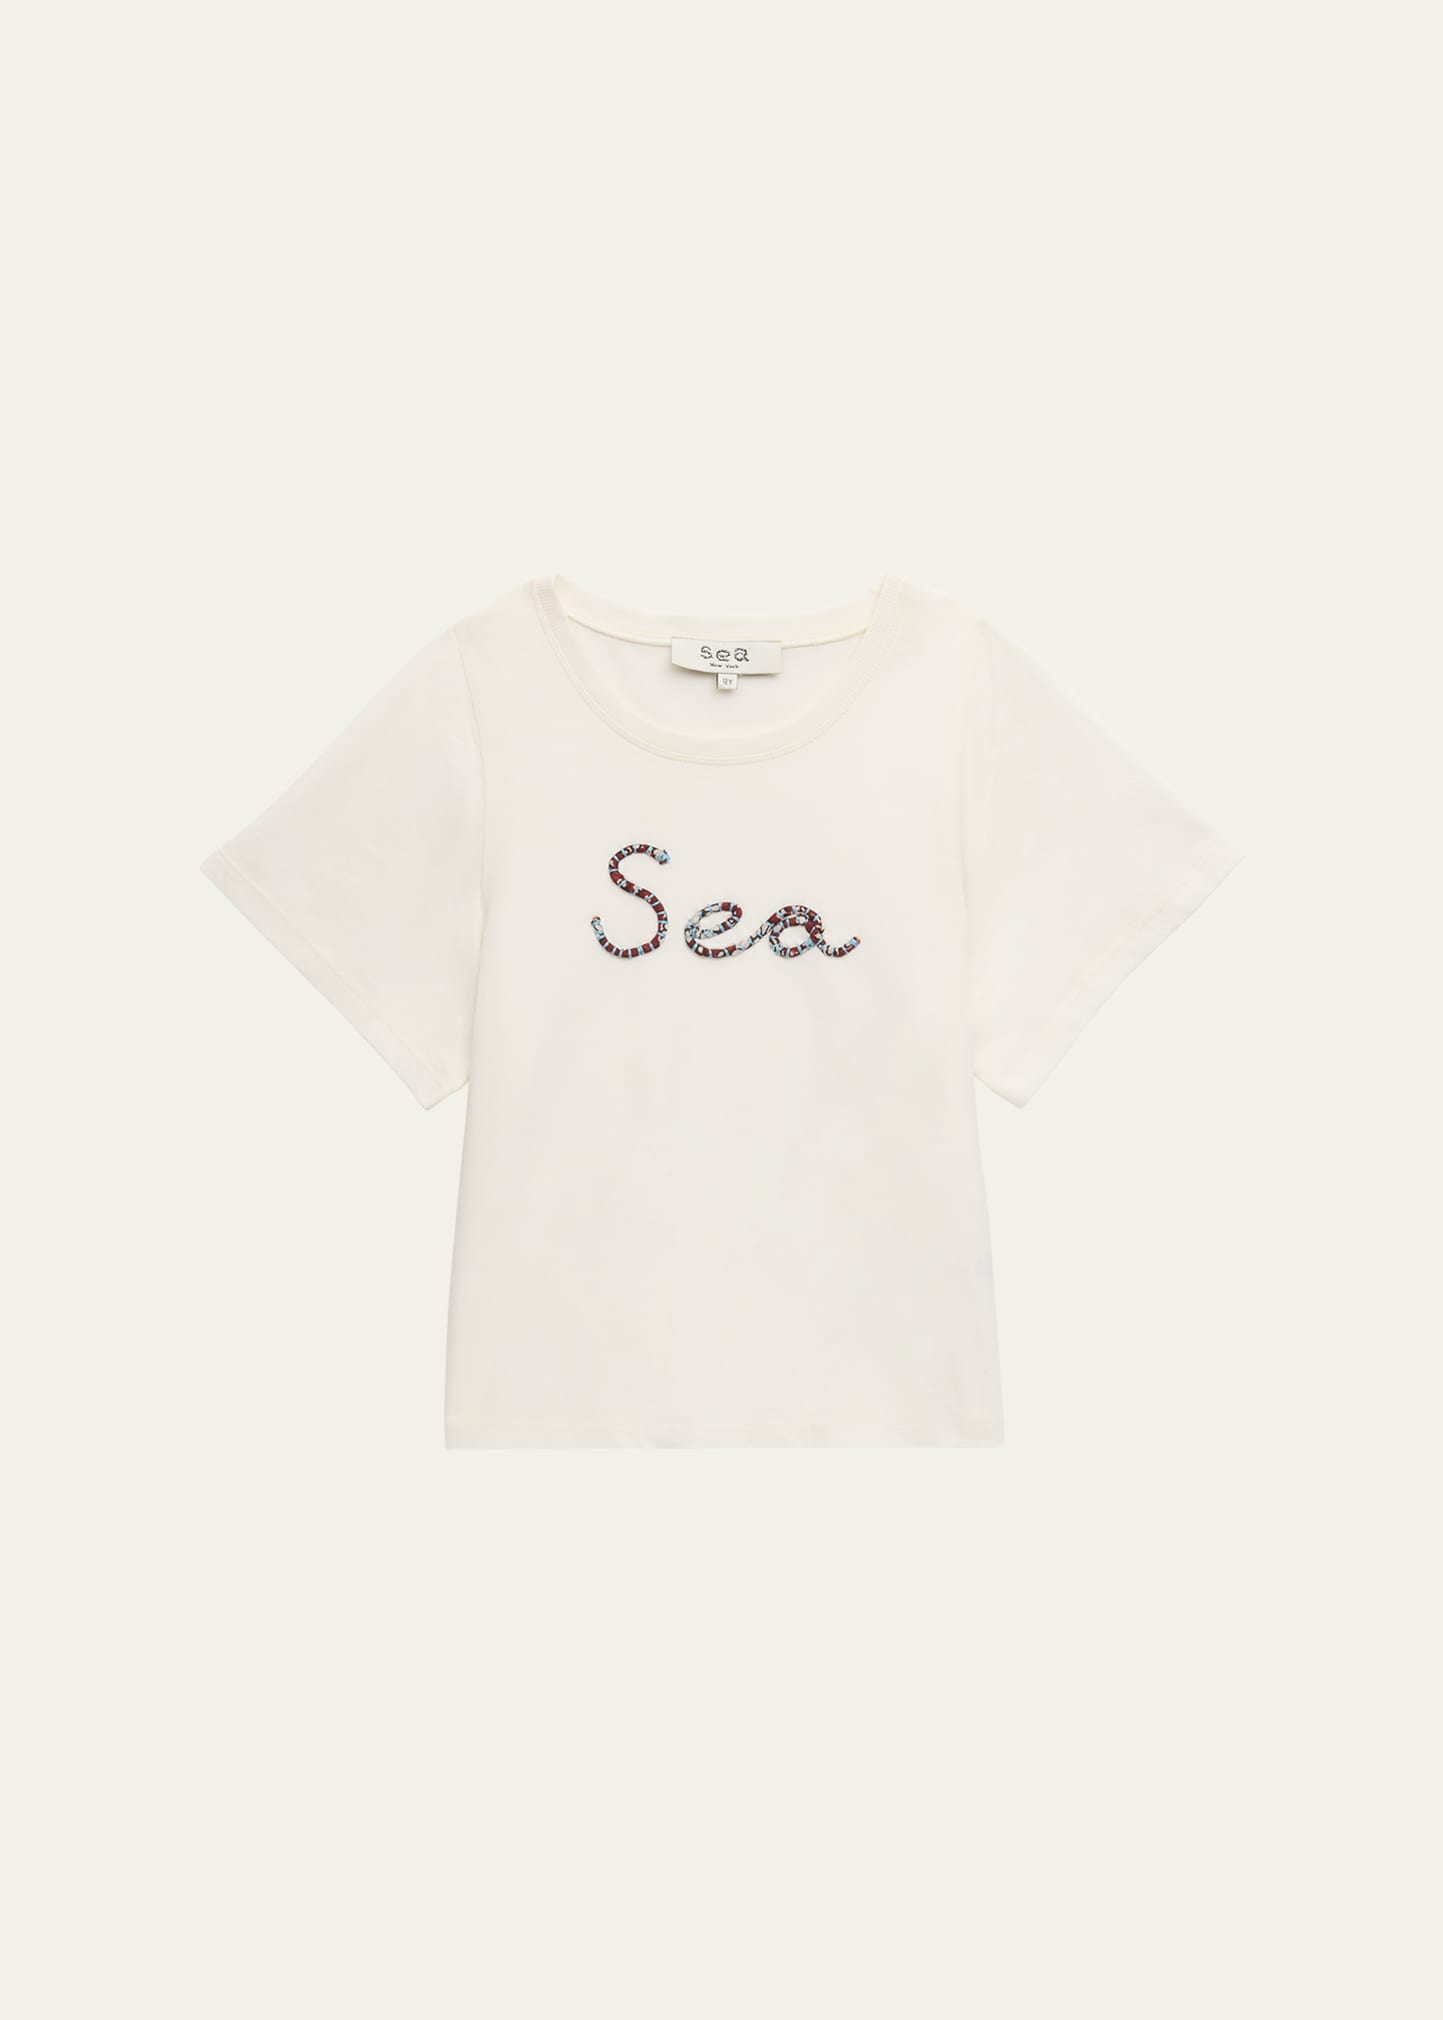 Girl's Sea Embroidery Short-Sleeve T-Shirt, Size 2-14